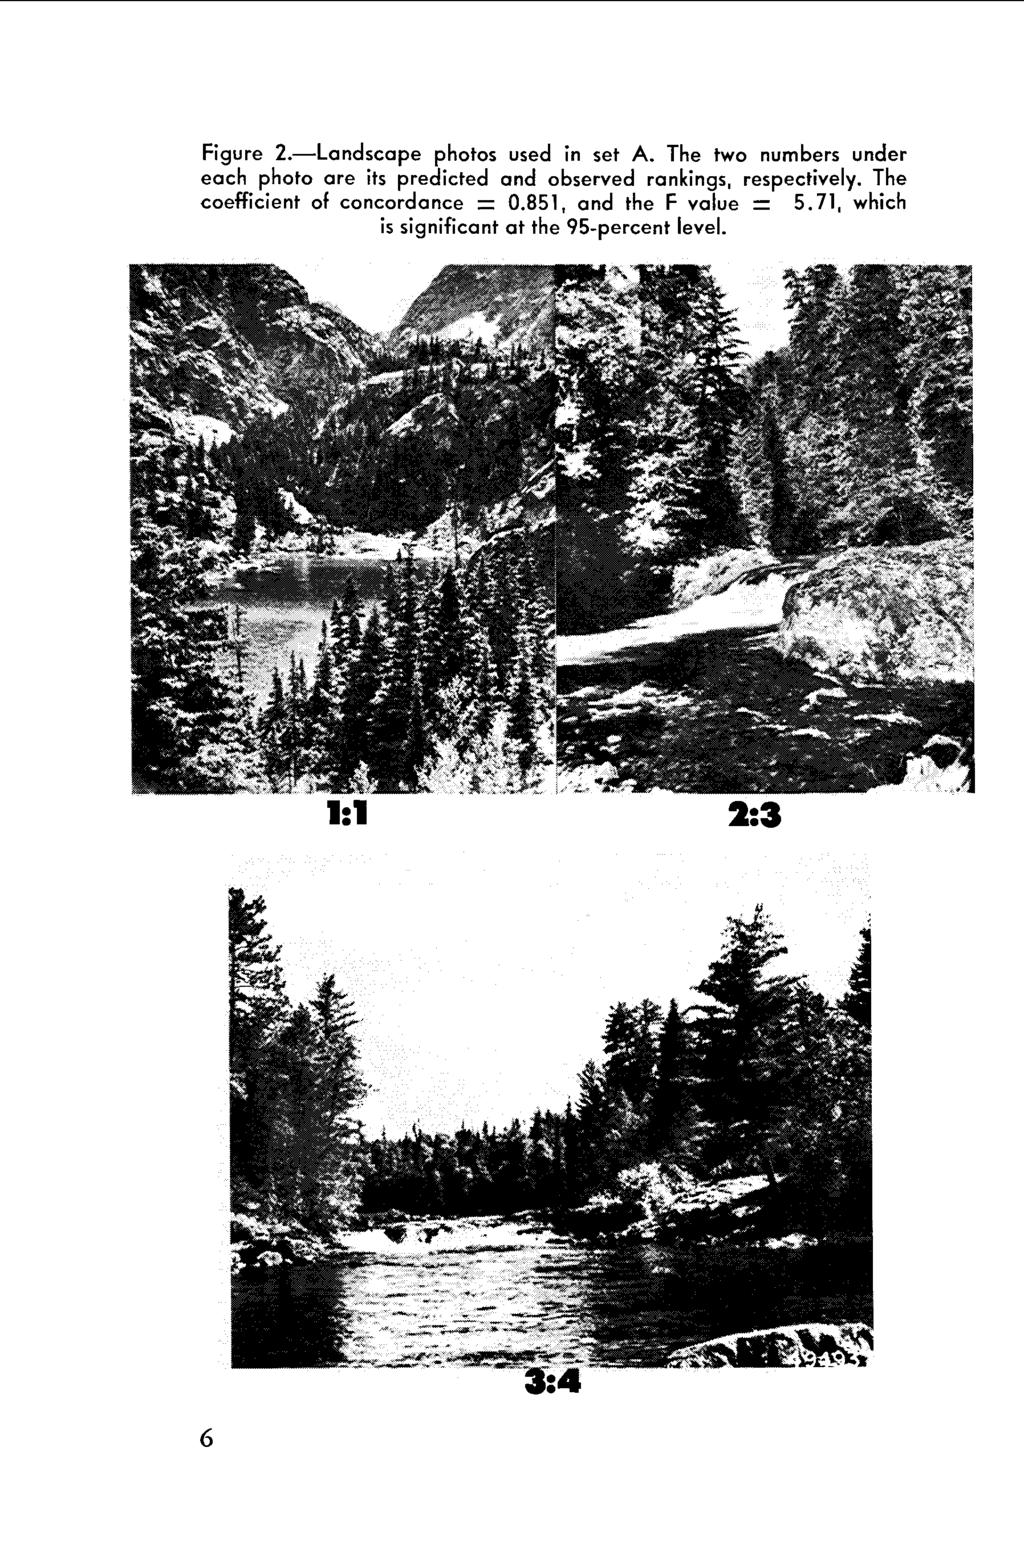 Figure 2.-Landscape photos used in set A.